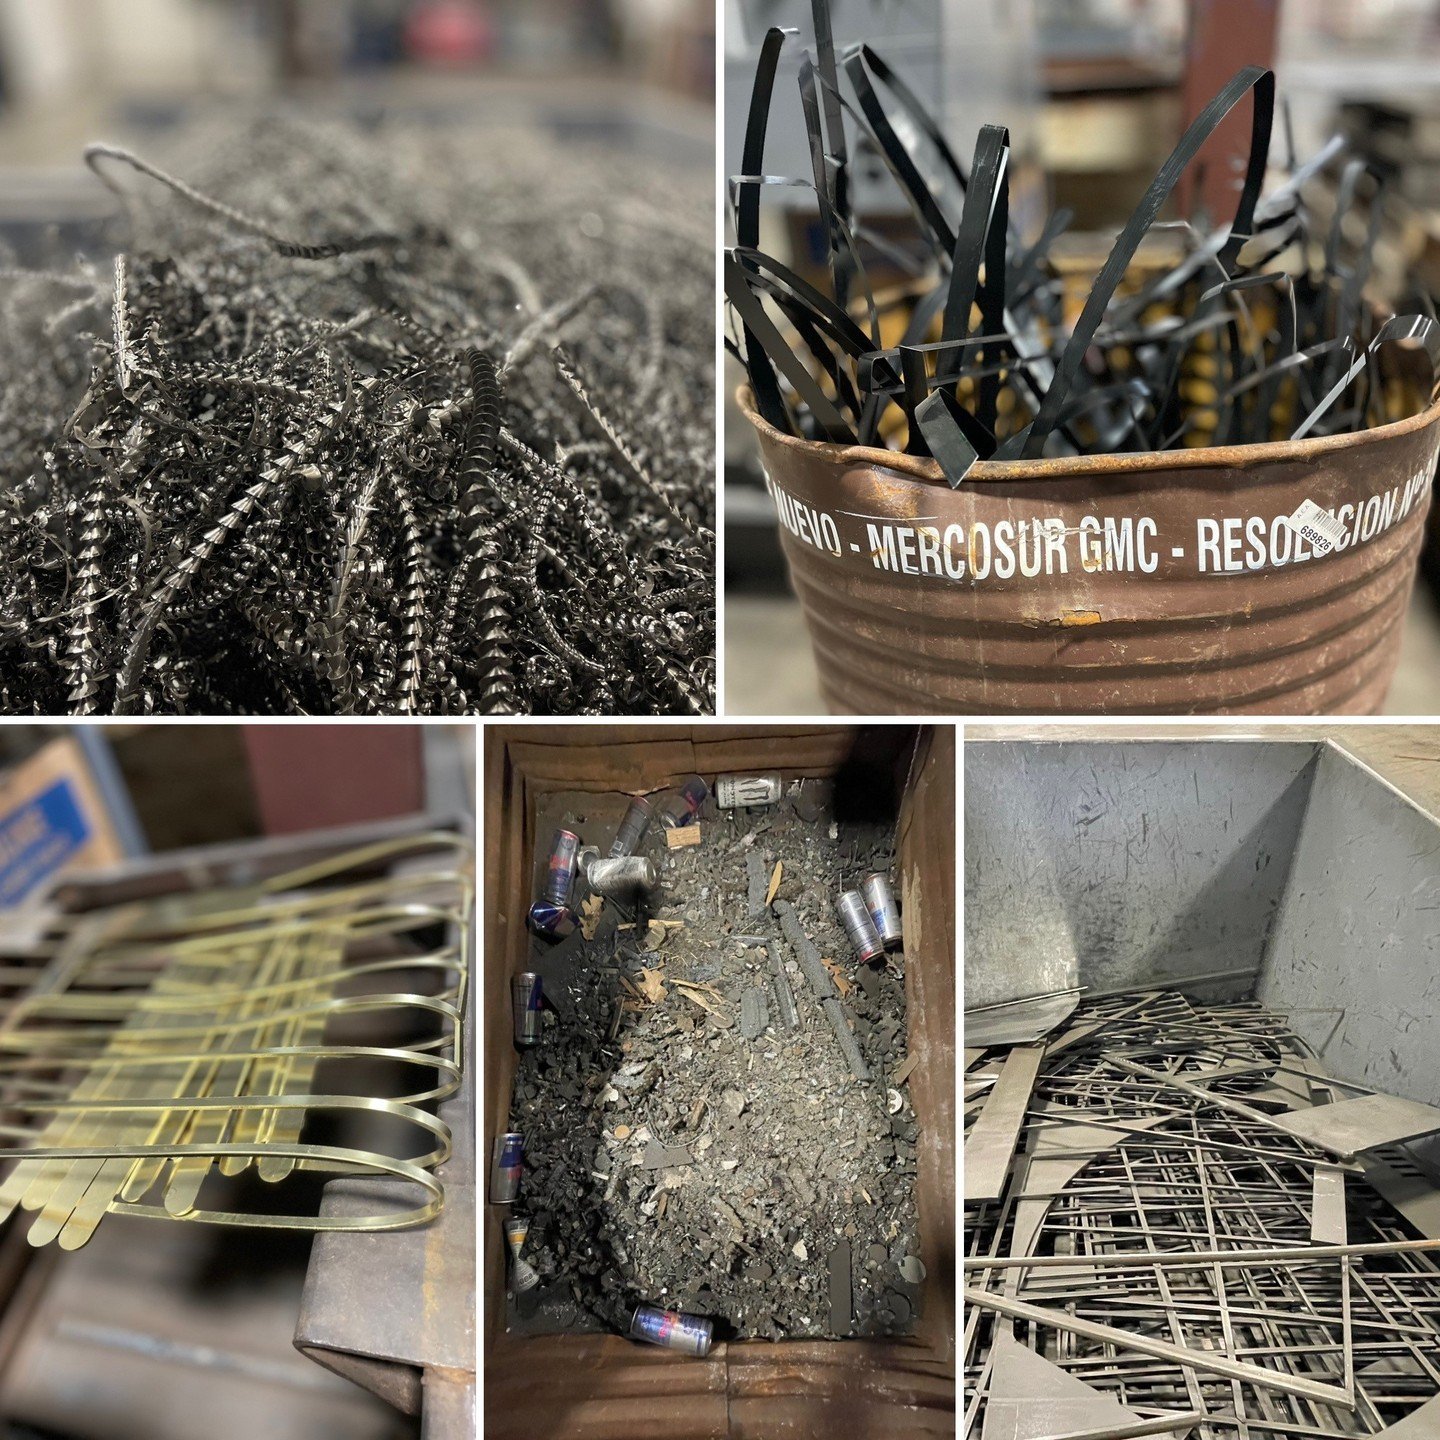 Today, as we celebrate Earth Day, we're excited to share how IronStrong is doing its part to promote sustainability and environmental stewardship. At the heart of our fabrication process is a deep commitment to recycling metal. This responsible reuse